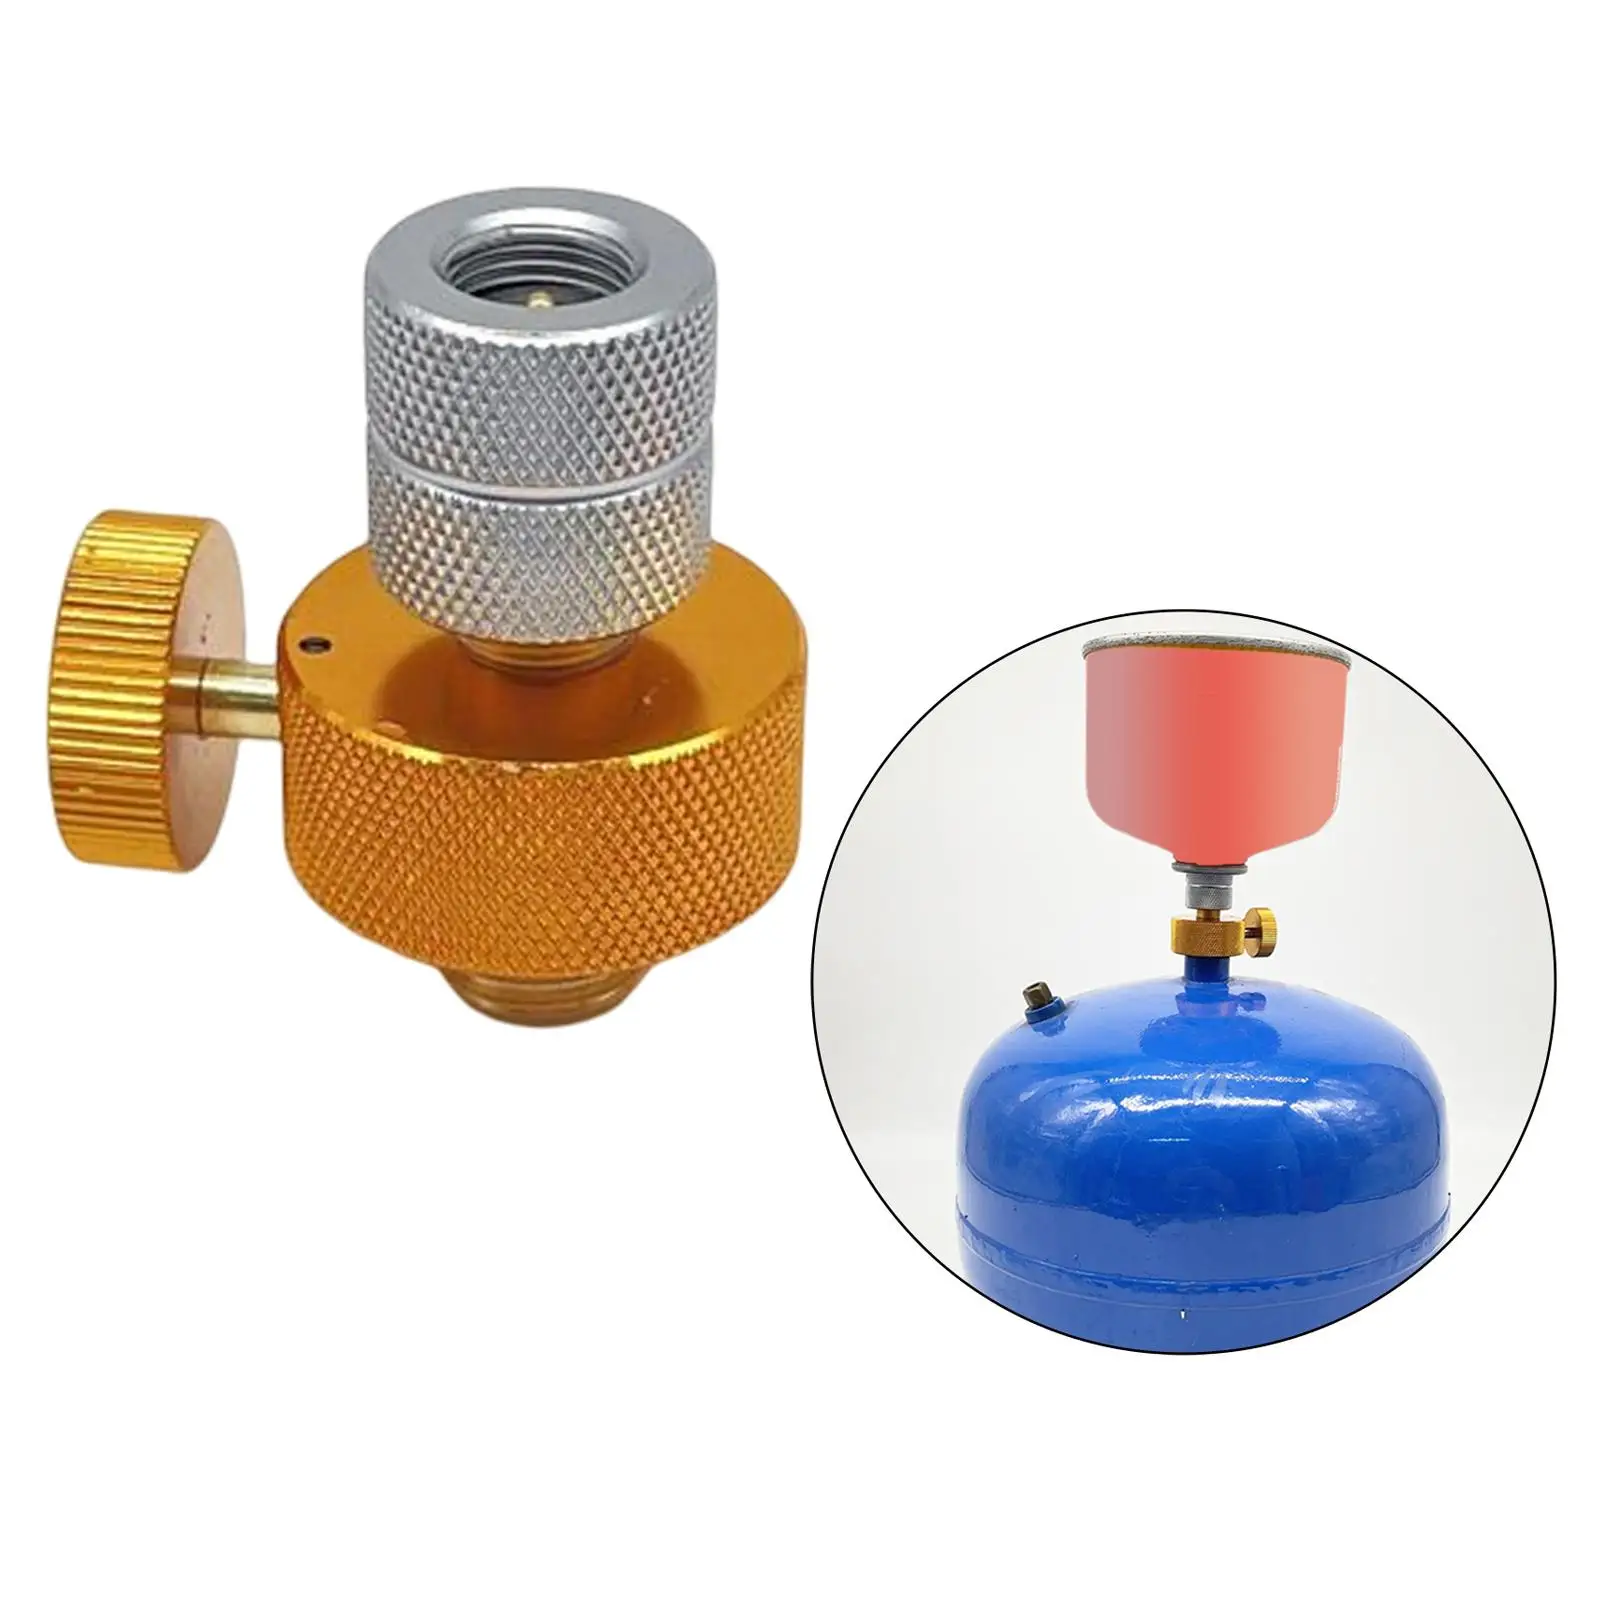 Outdoor Gas Tank Adapter Connector Gas Filling Adapter Cylinder Tank Split Type Convert for Camping Filling Hiking Cooking